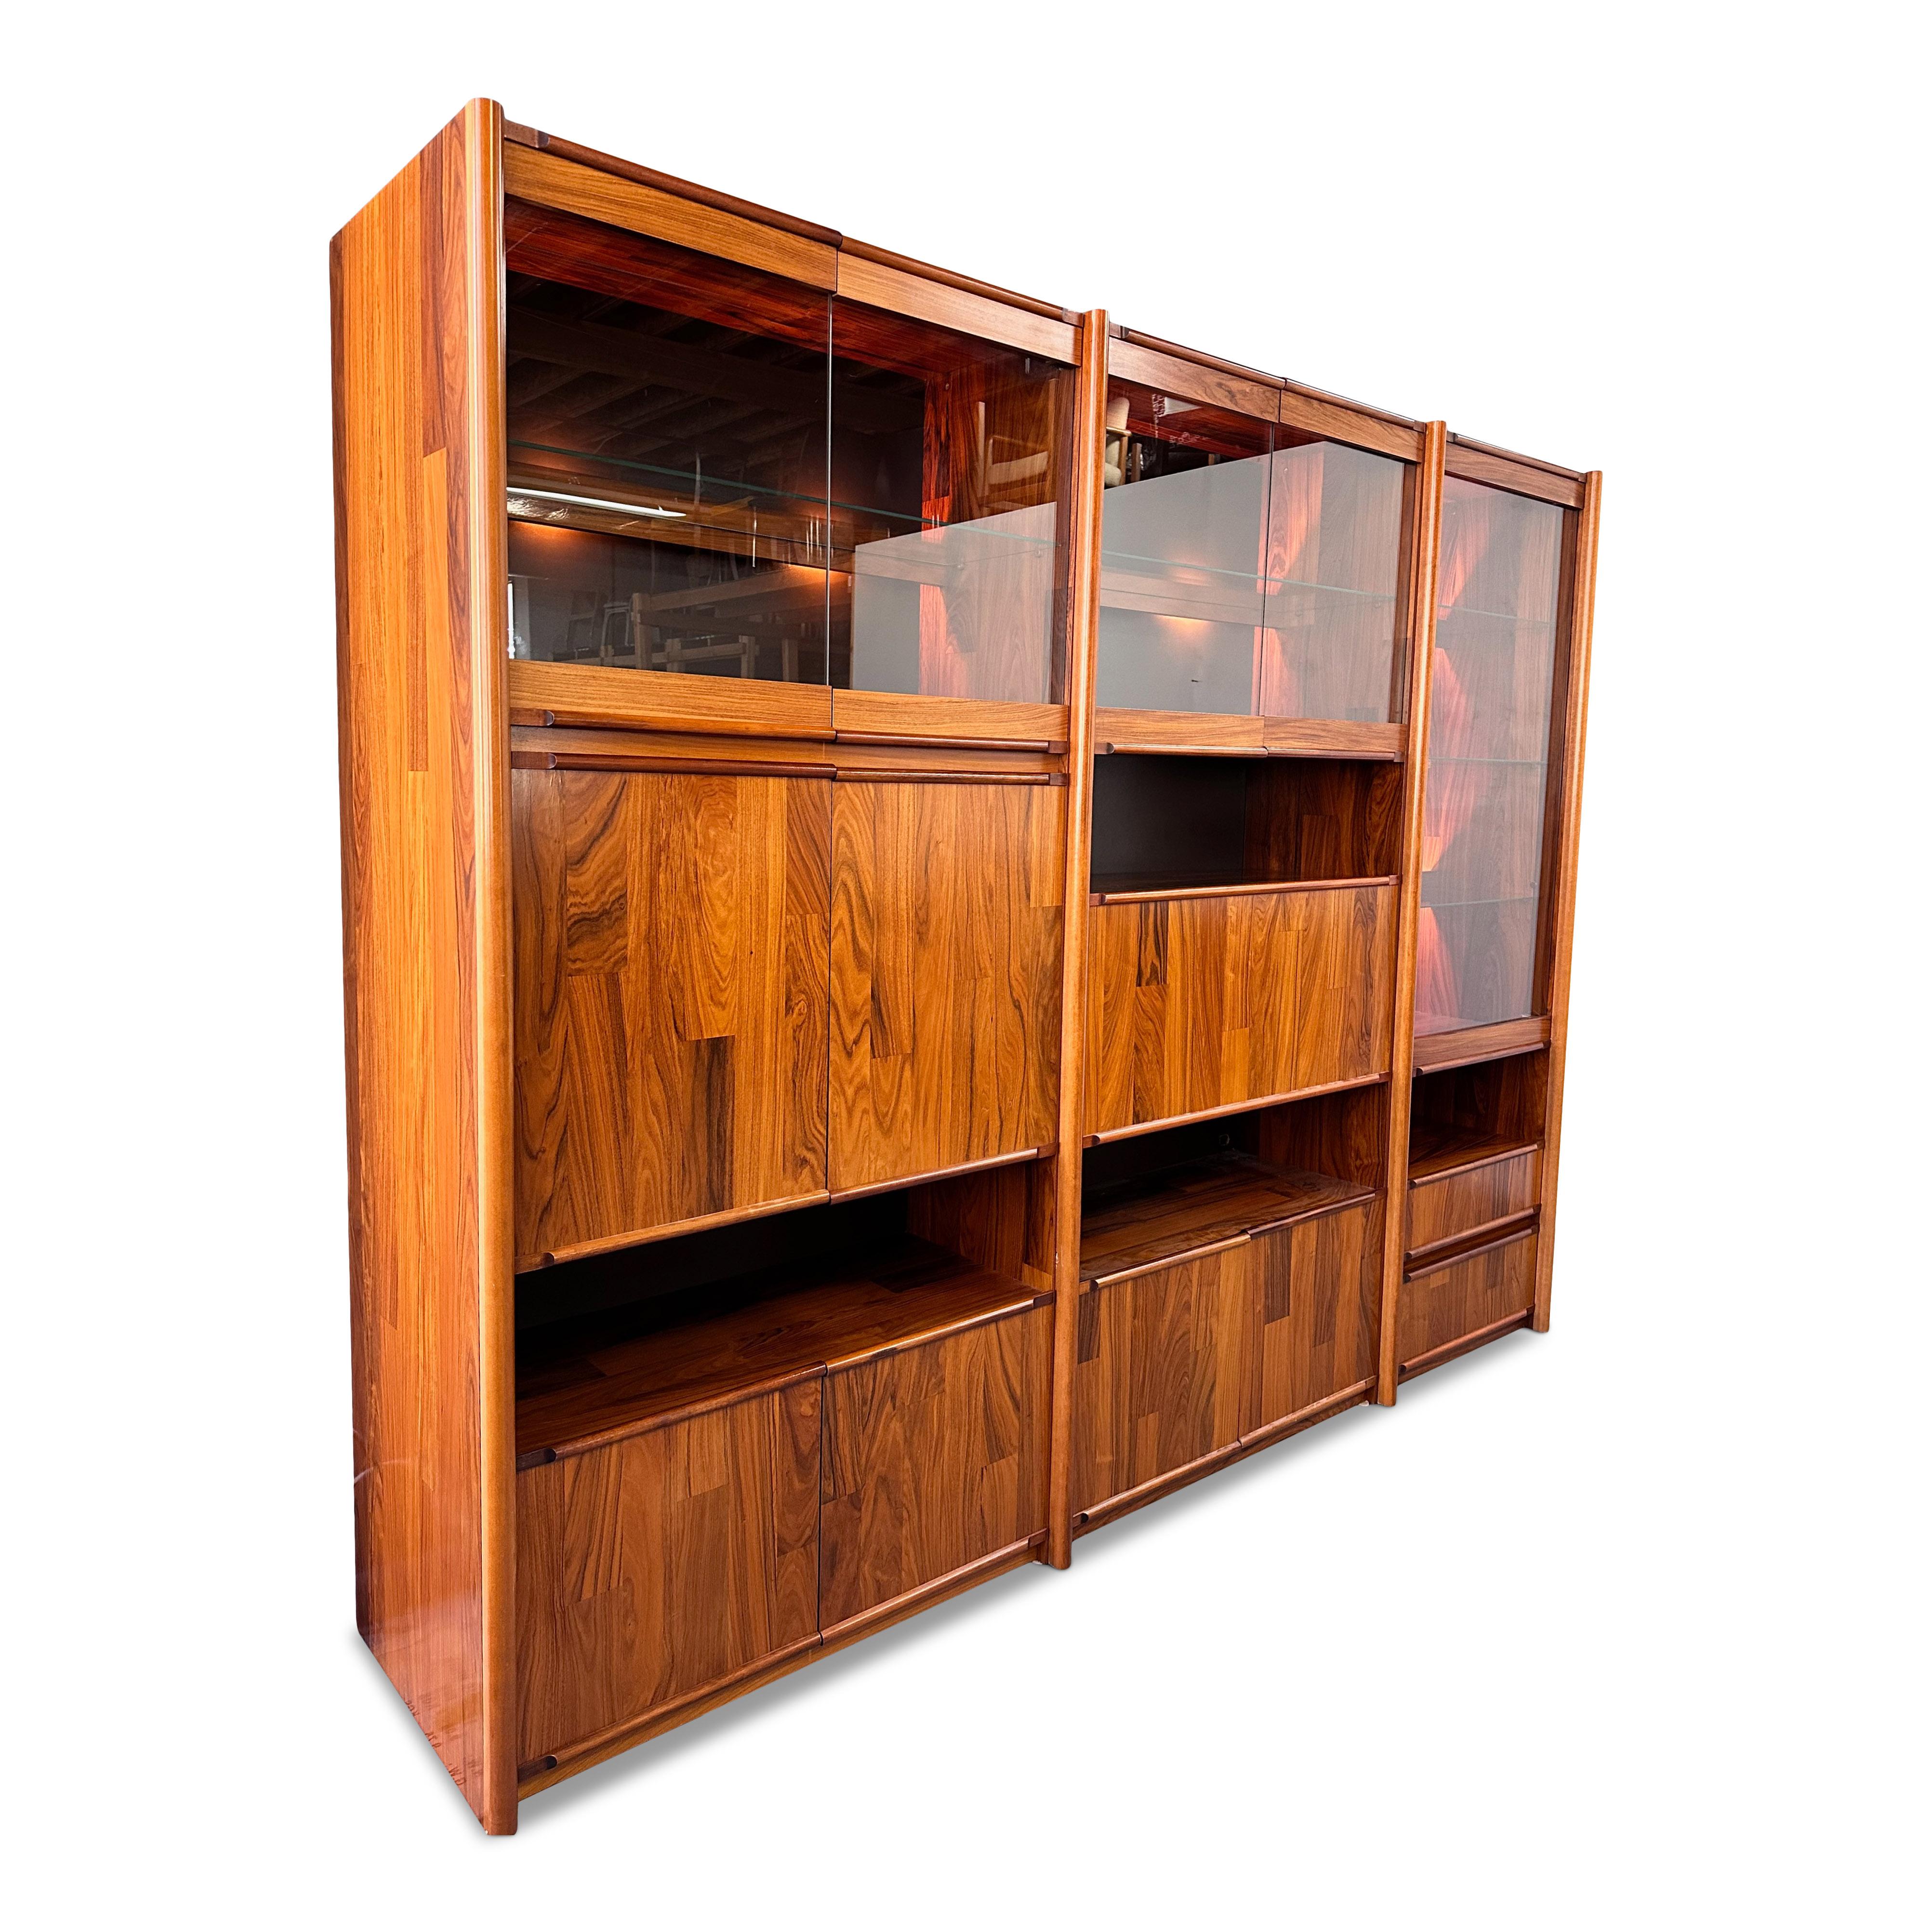 Really beautiful and interesting wall unit using rosewood veneer strips in the manner of celebrated Brazilian furniture designer Jorge Zalszupin. The shelves are also rosewood veneer and beautiful. The three units are lighted with calming low